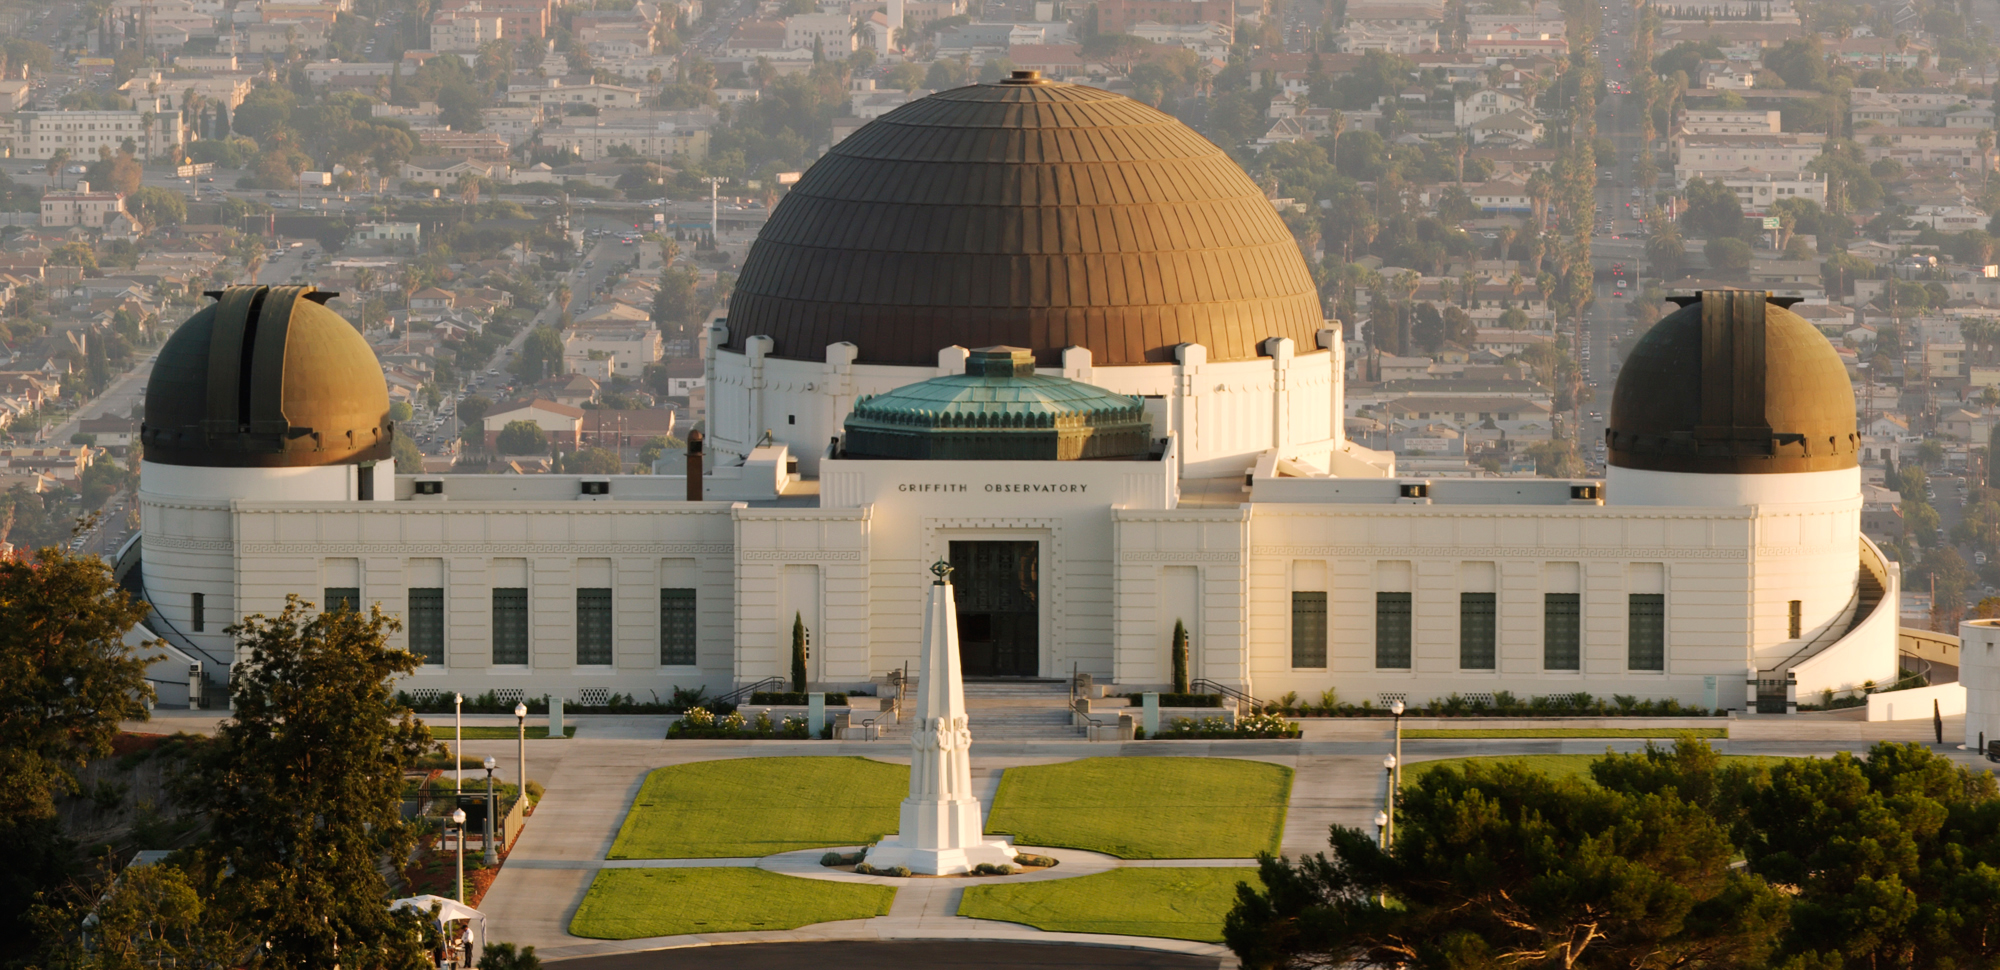 The Griffith Observatory, where author John Logsdon will give a lecture on the American Space Program under President Richard Nixon